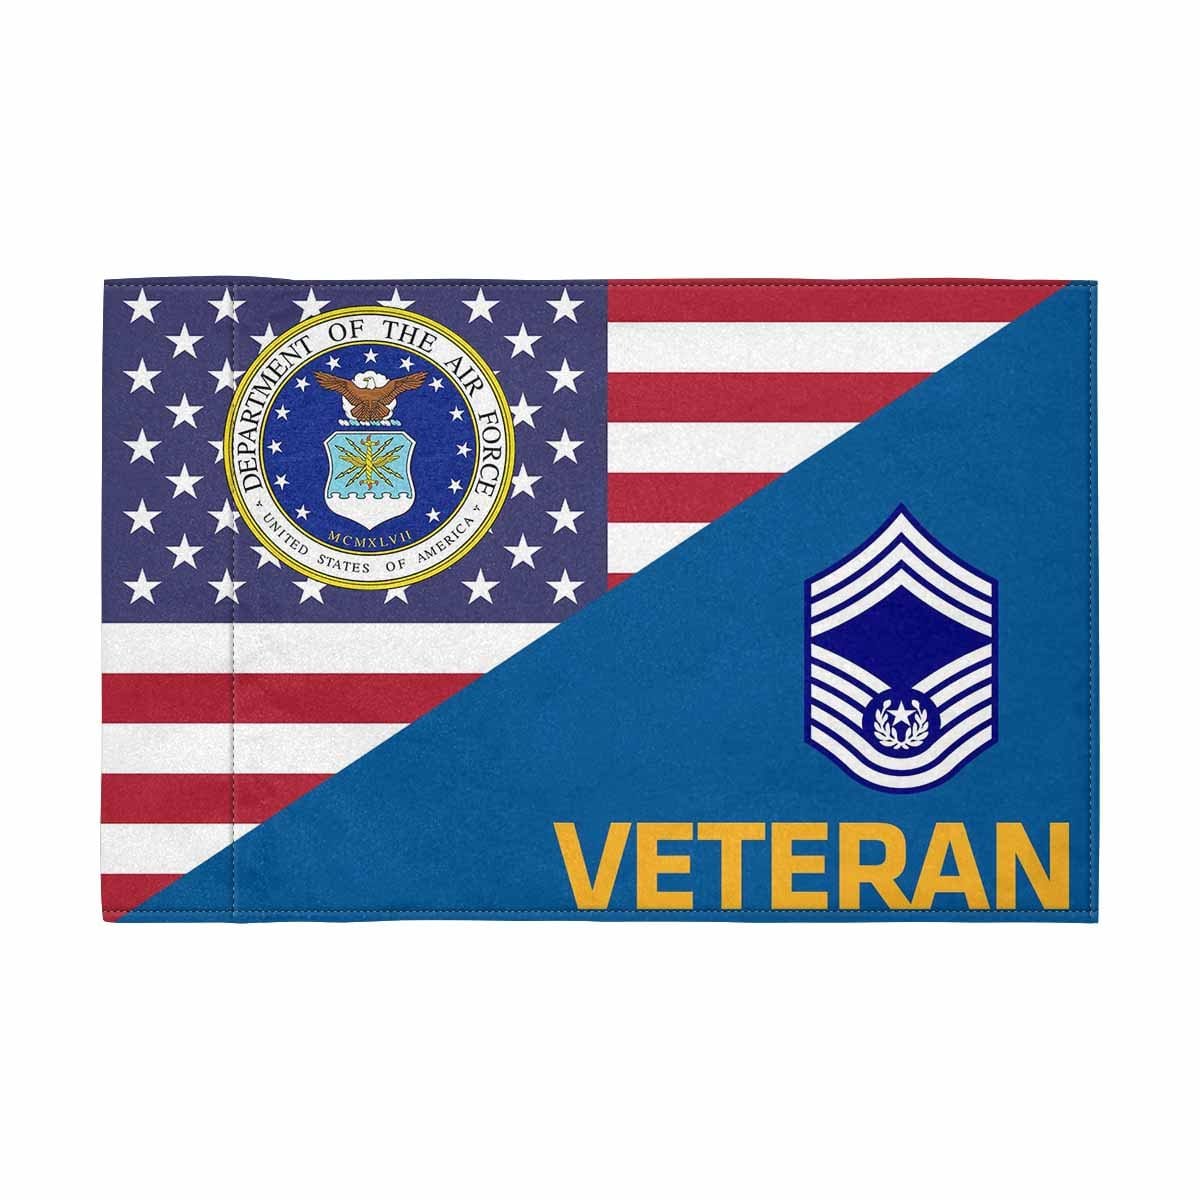 US Air Force E-9 CMSAF Veteran Motorcycle Flag 9" x 6" Twin-Side Printing D01-MotorcycleFlag-USAF-Veterans Nation